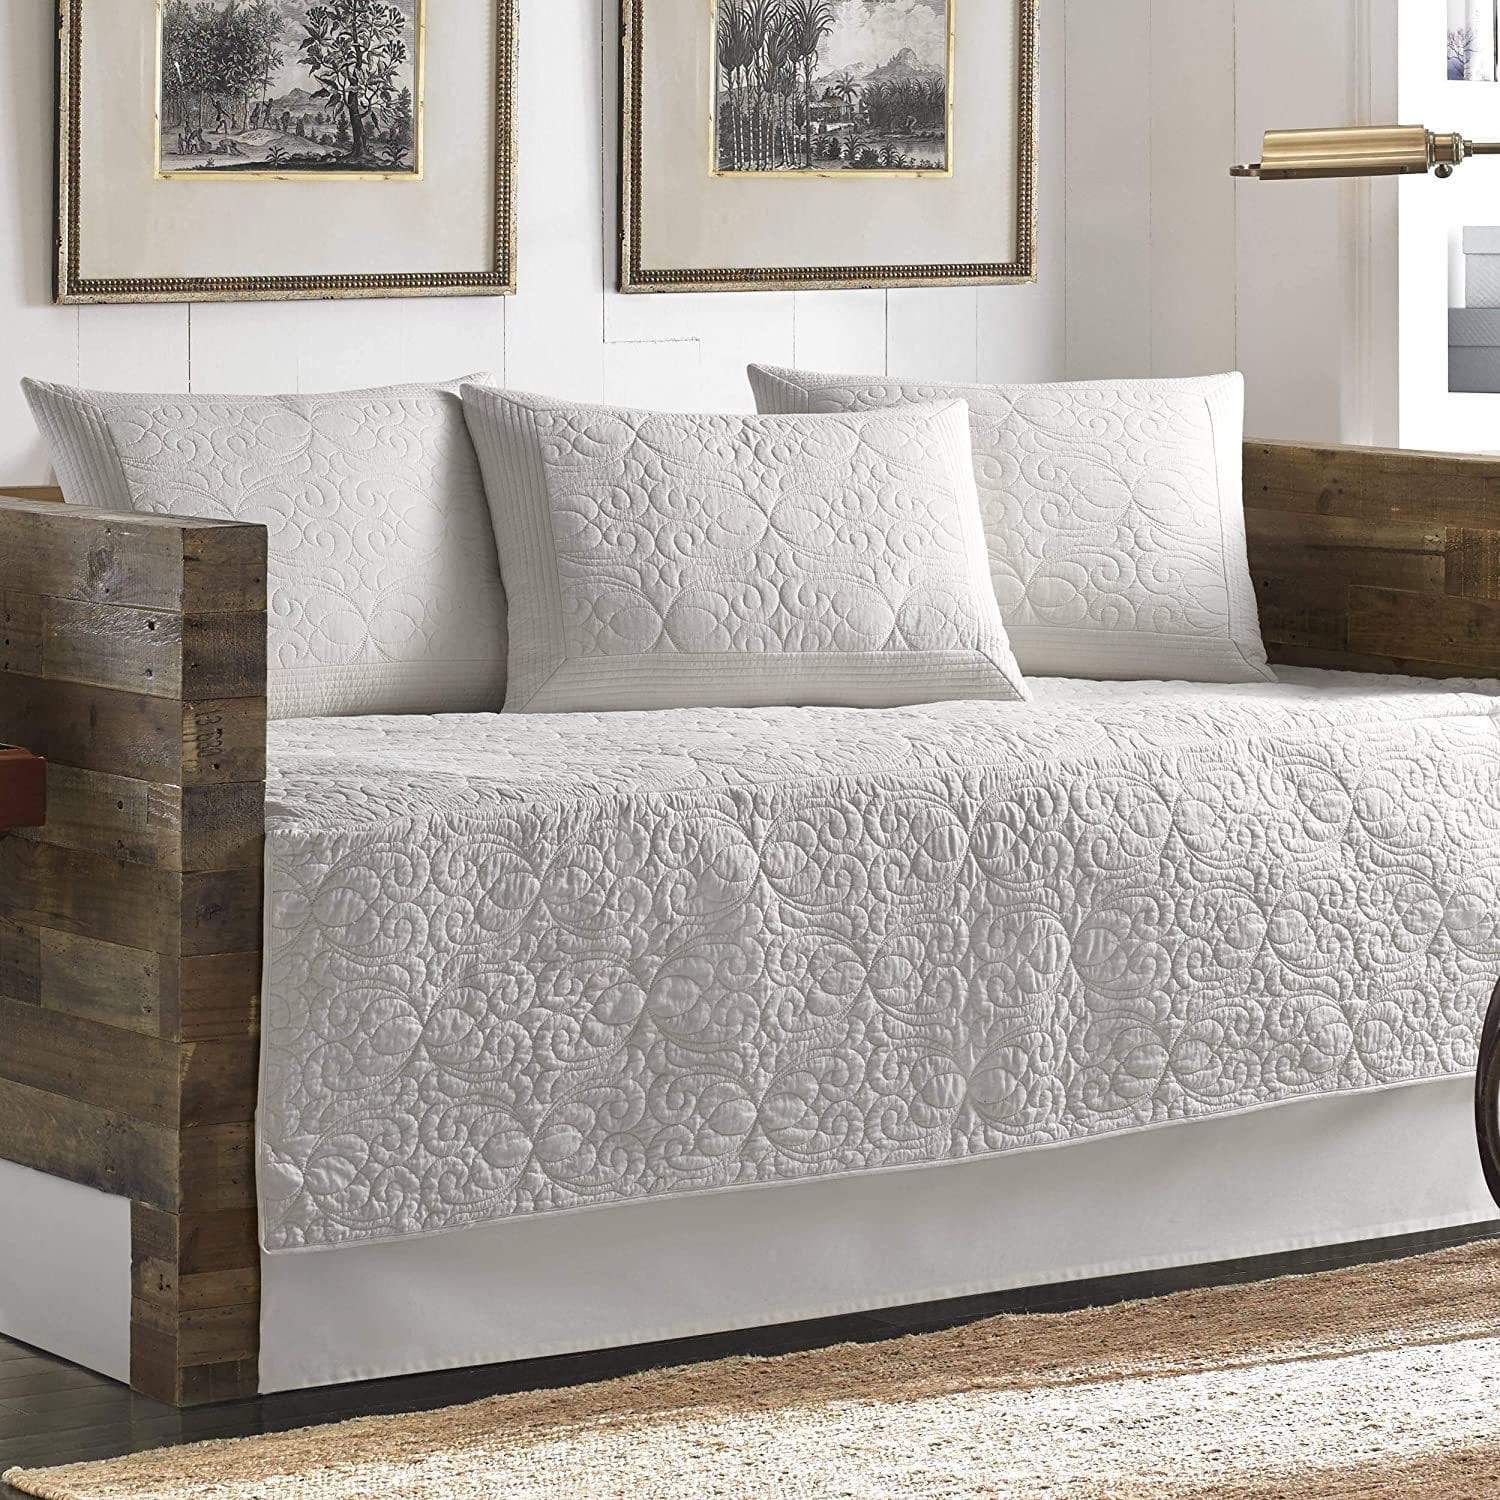 Tommy Bahama Bed & Bath Twin / off white Tommy Bahama - Daybed Quilt Set